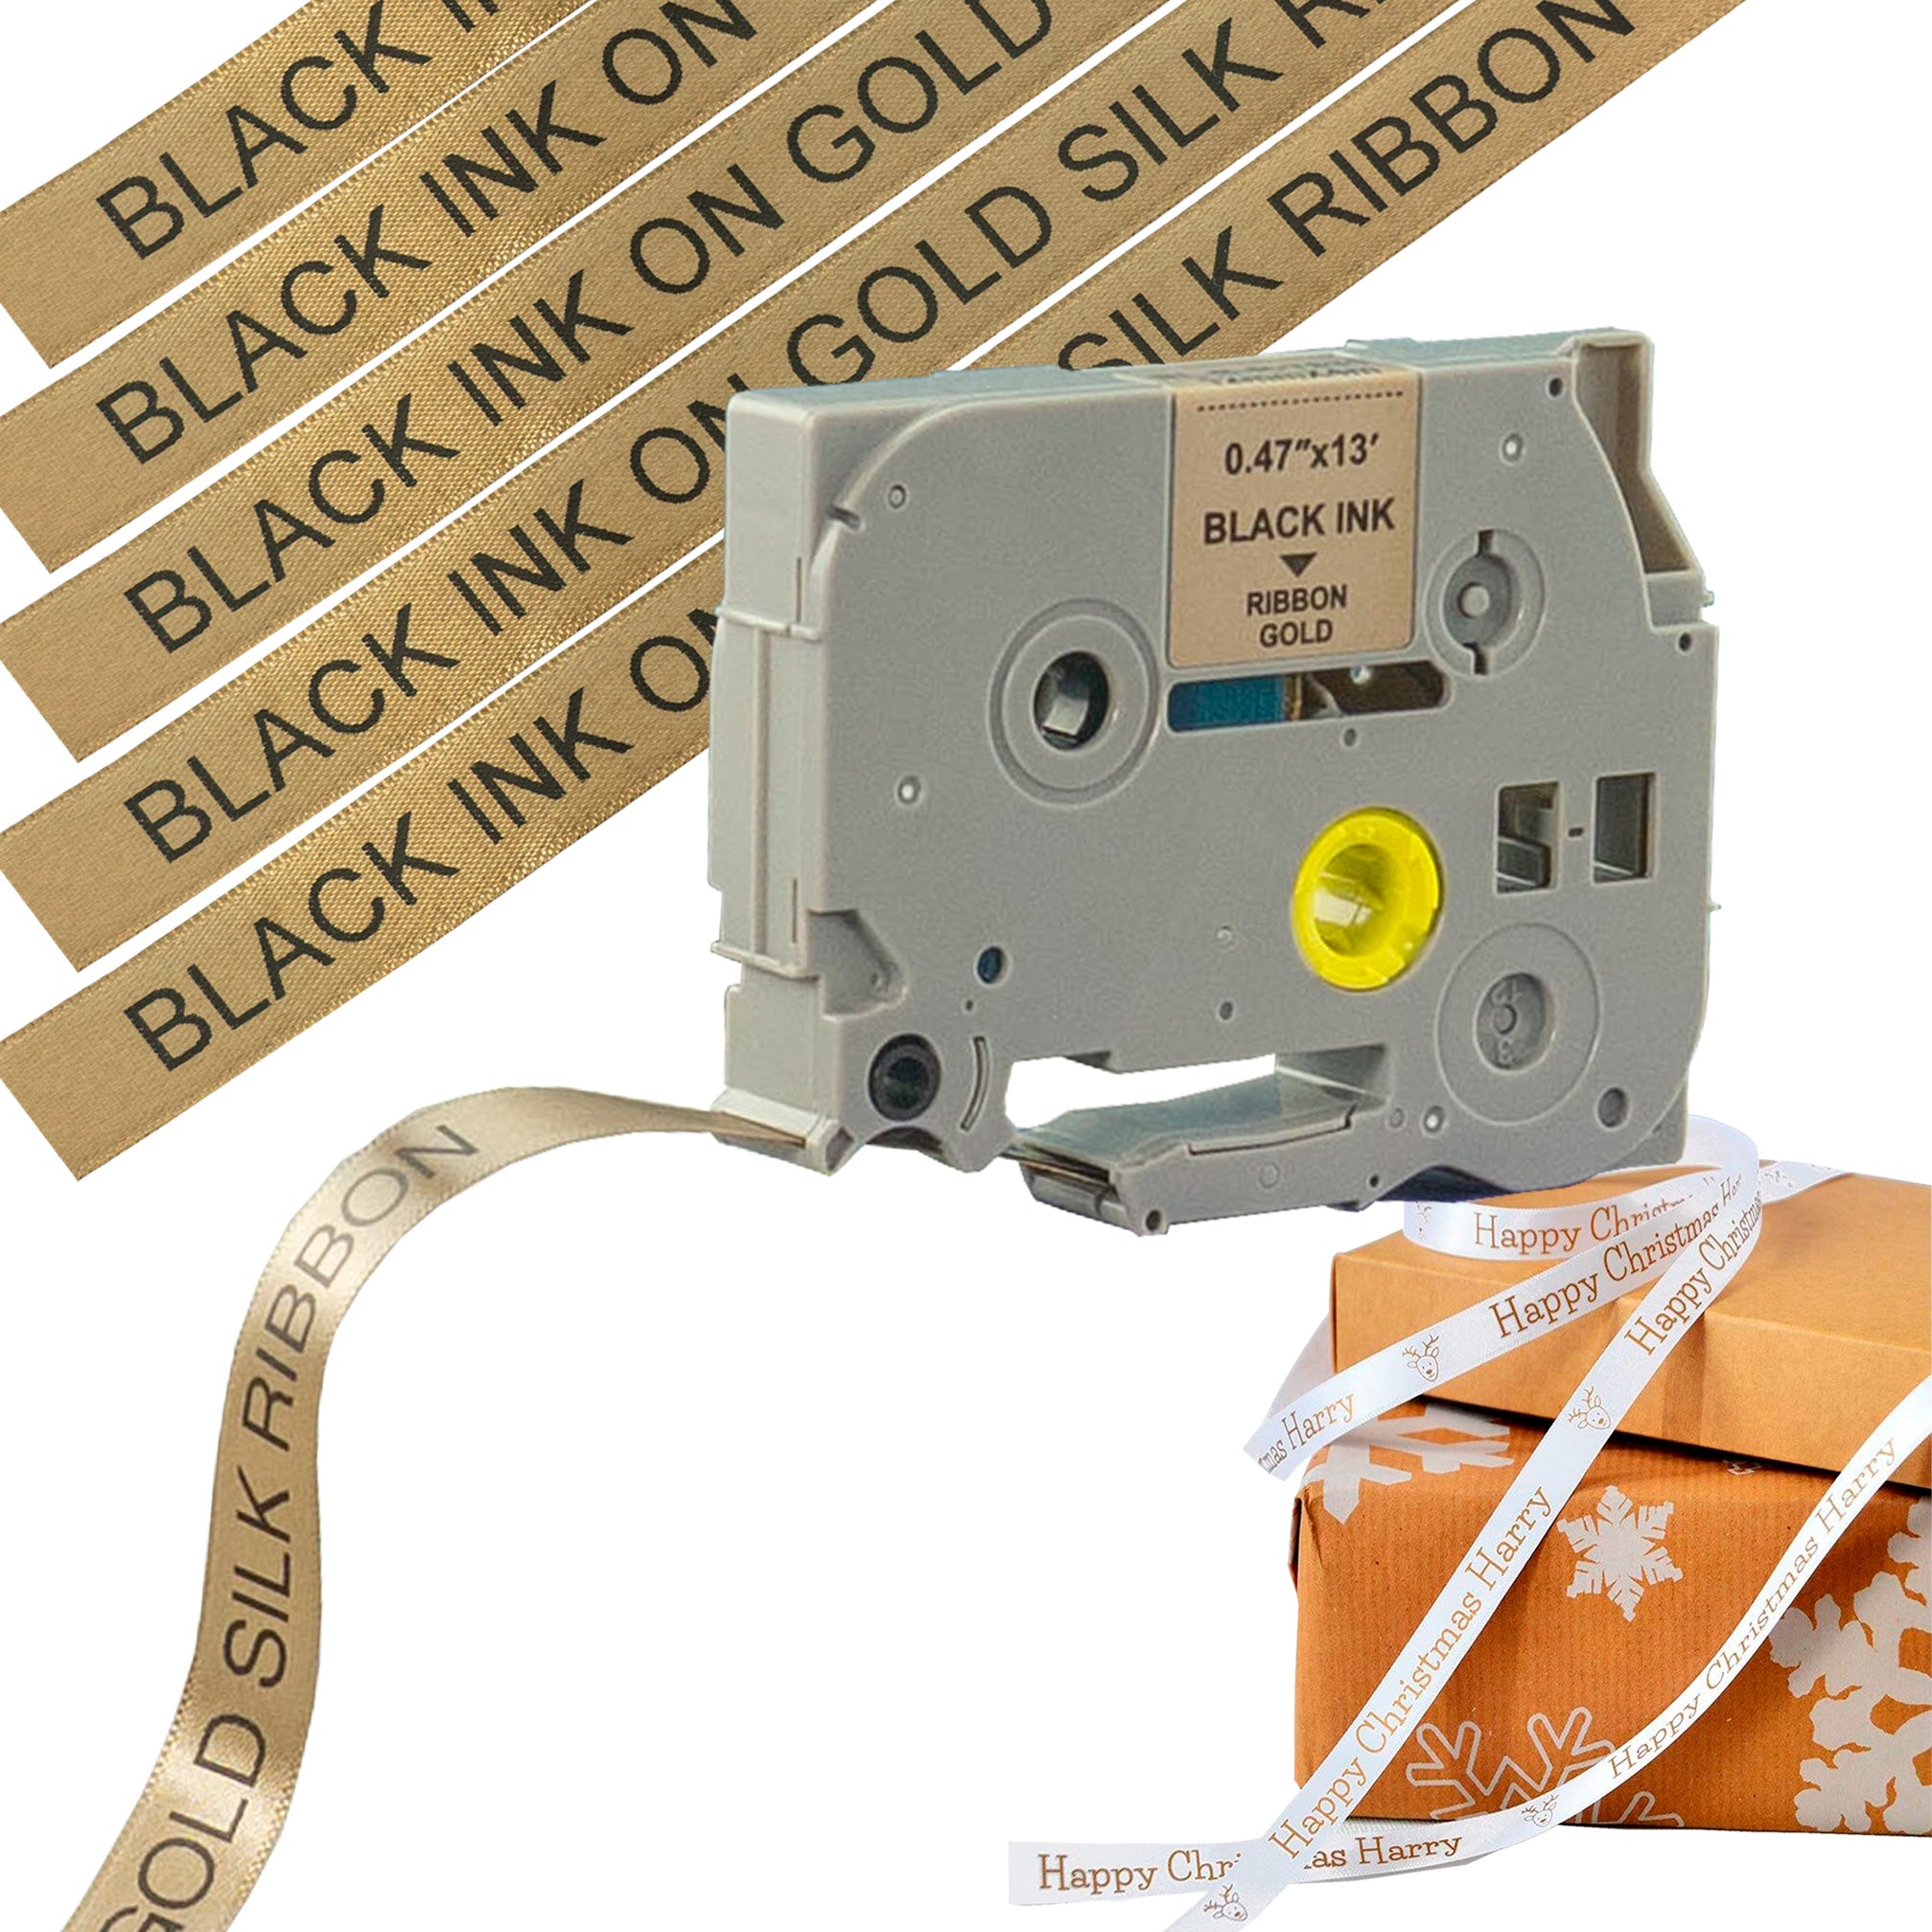 Compatible Brother T831P Silk Label Tapes Black on Gold 12mm x 4m